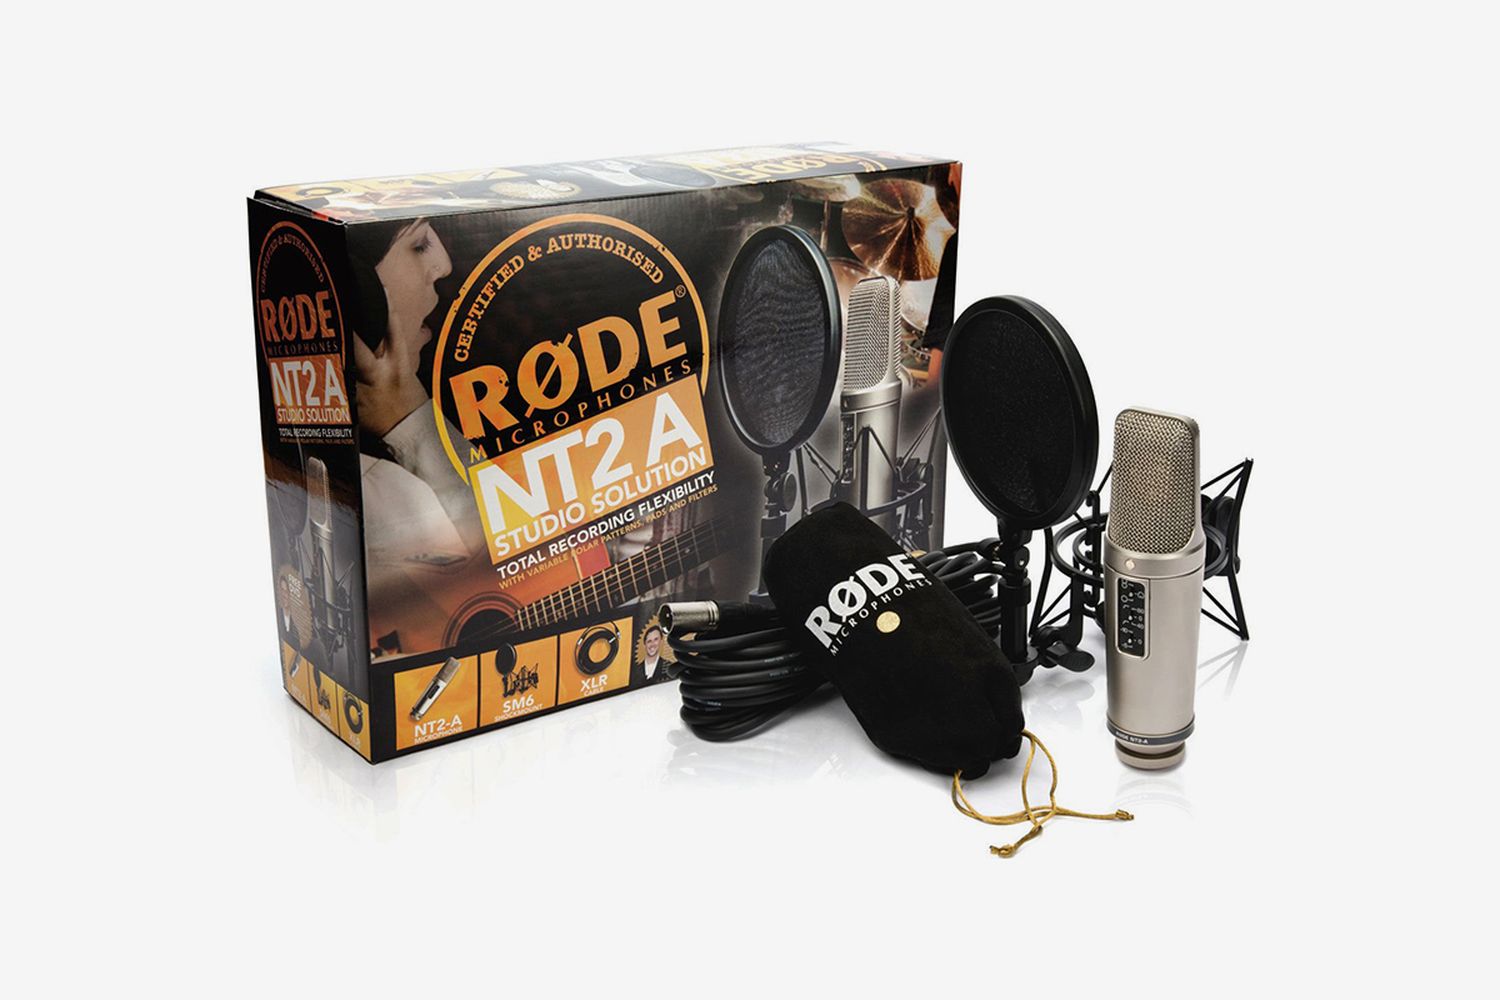 NT2-A Microphone with Primacoustic VoxGuard and Tripod Mic Stand